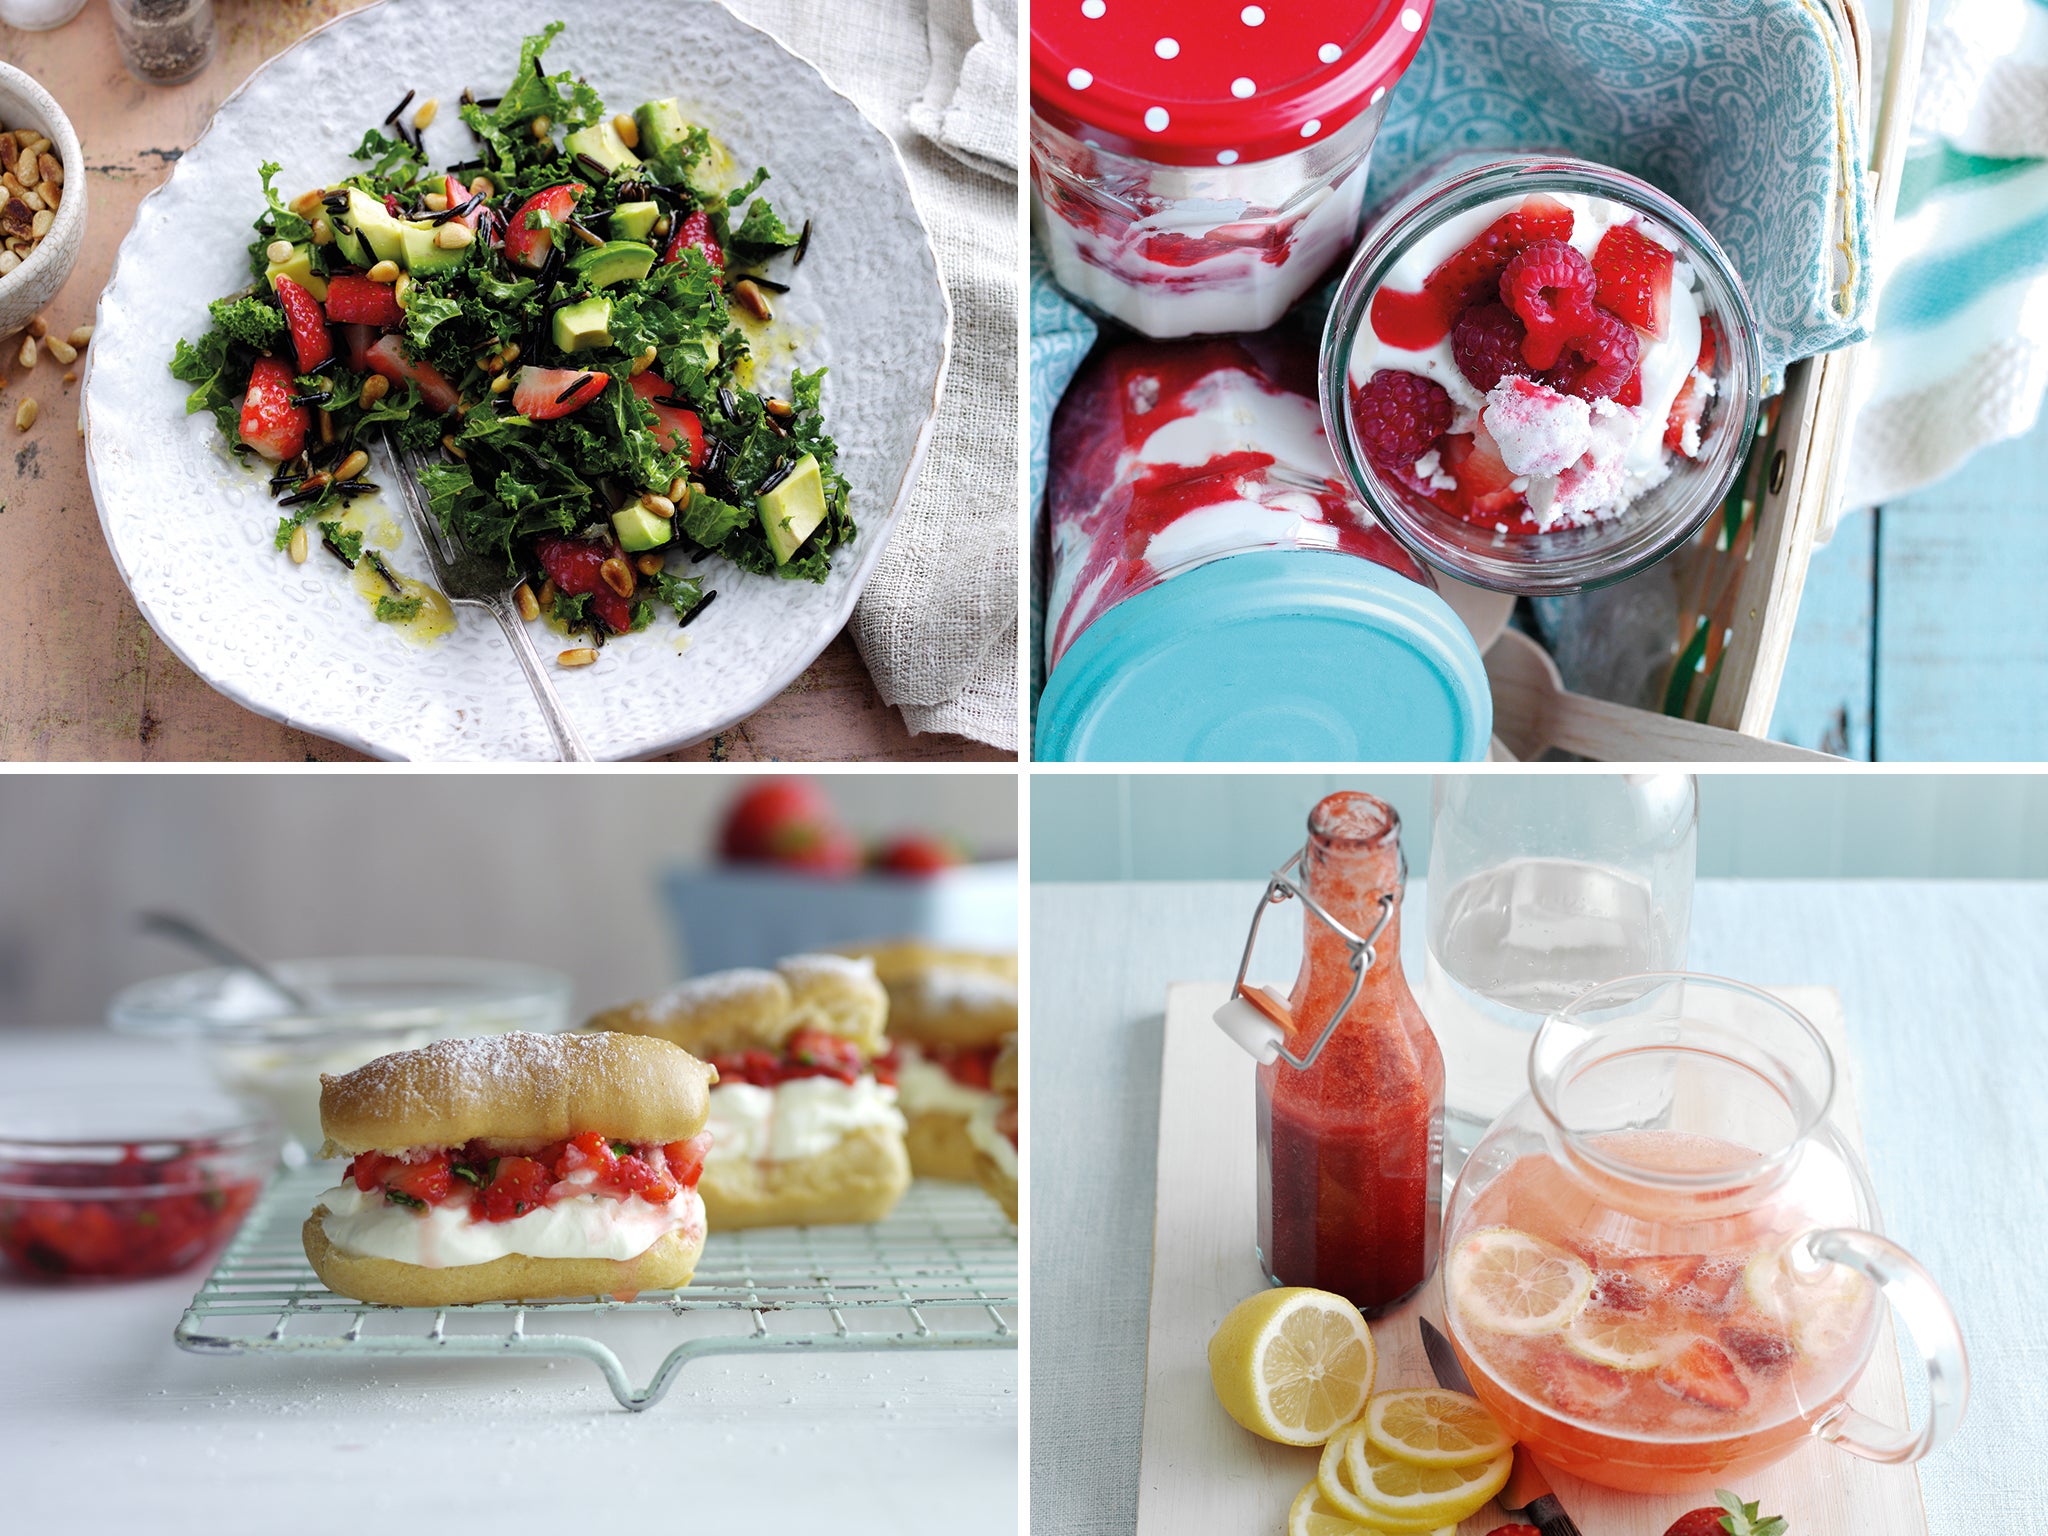 Sweet spot: strawberries can be savoury too